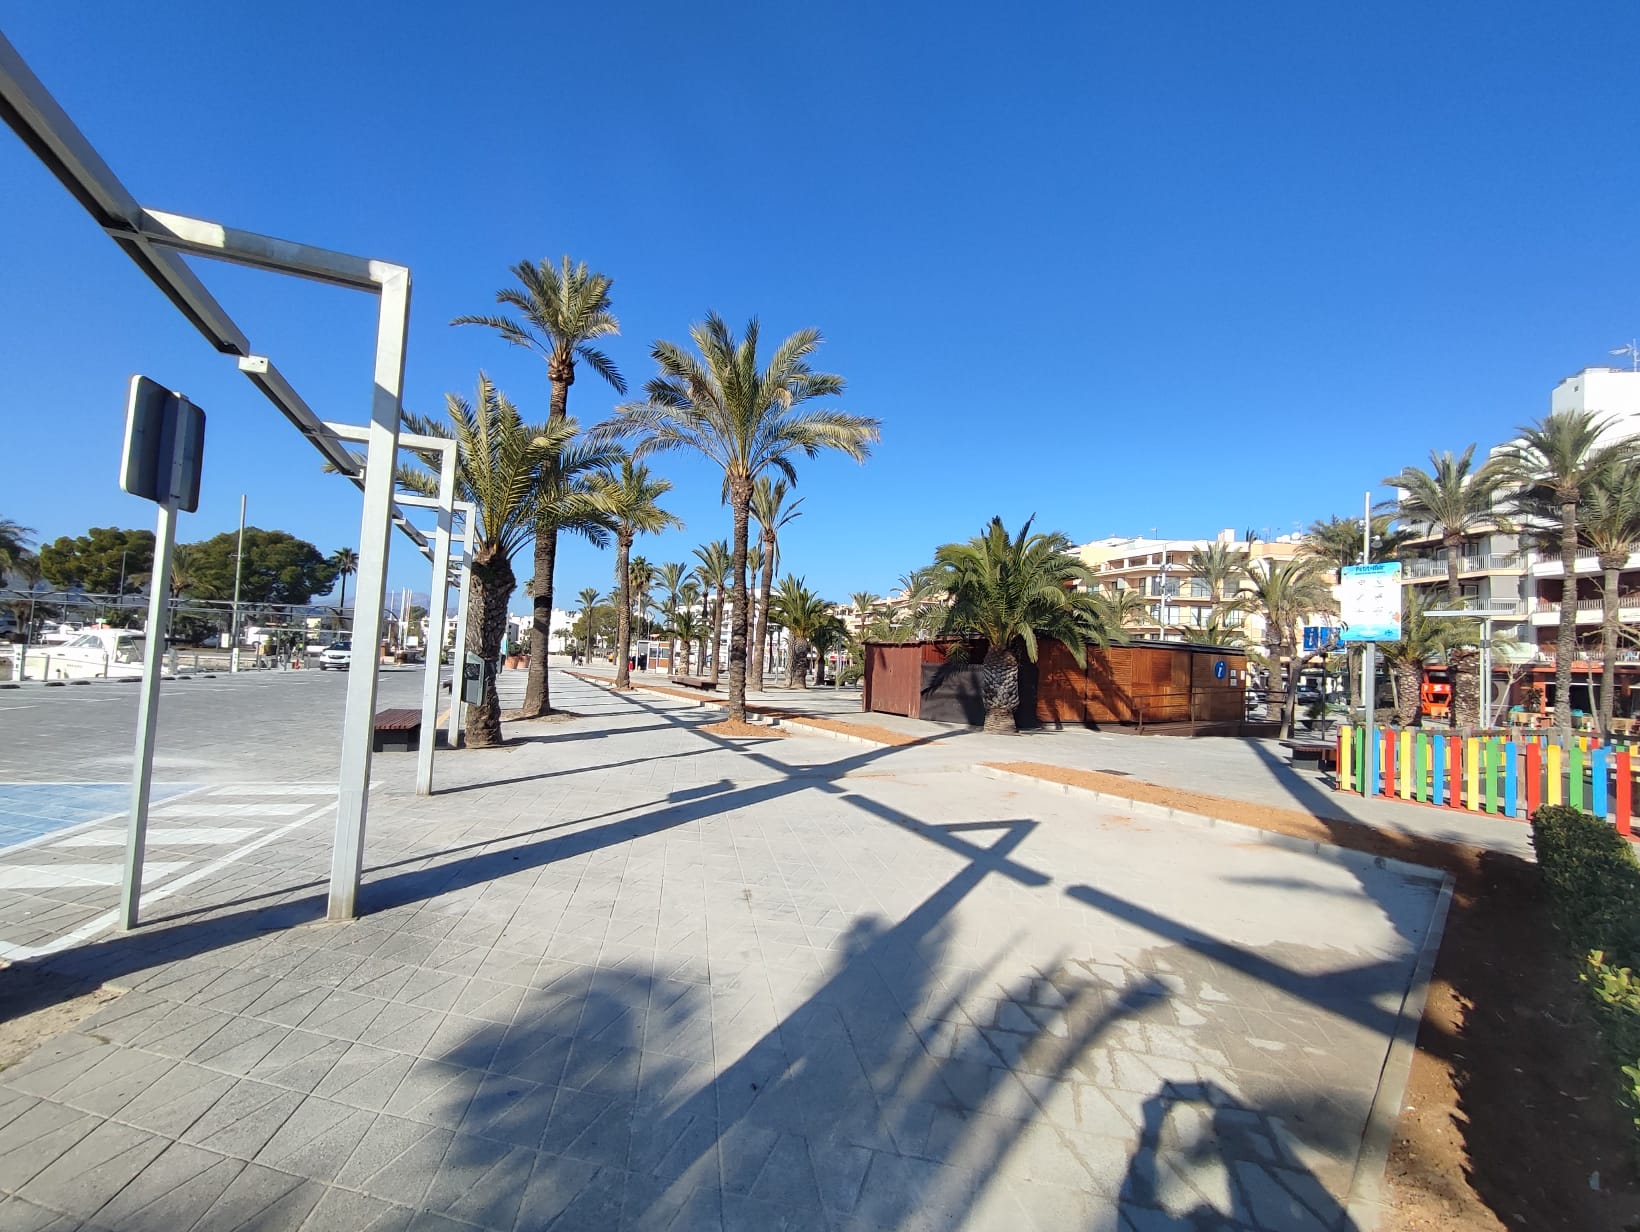 The APB completes work on the Alcúdia port seafront promenade